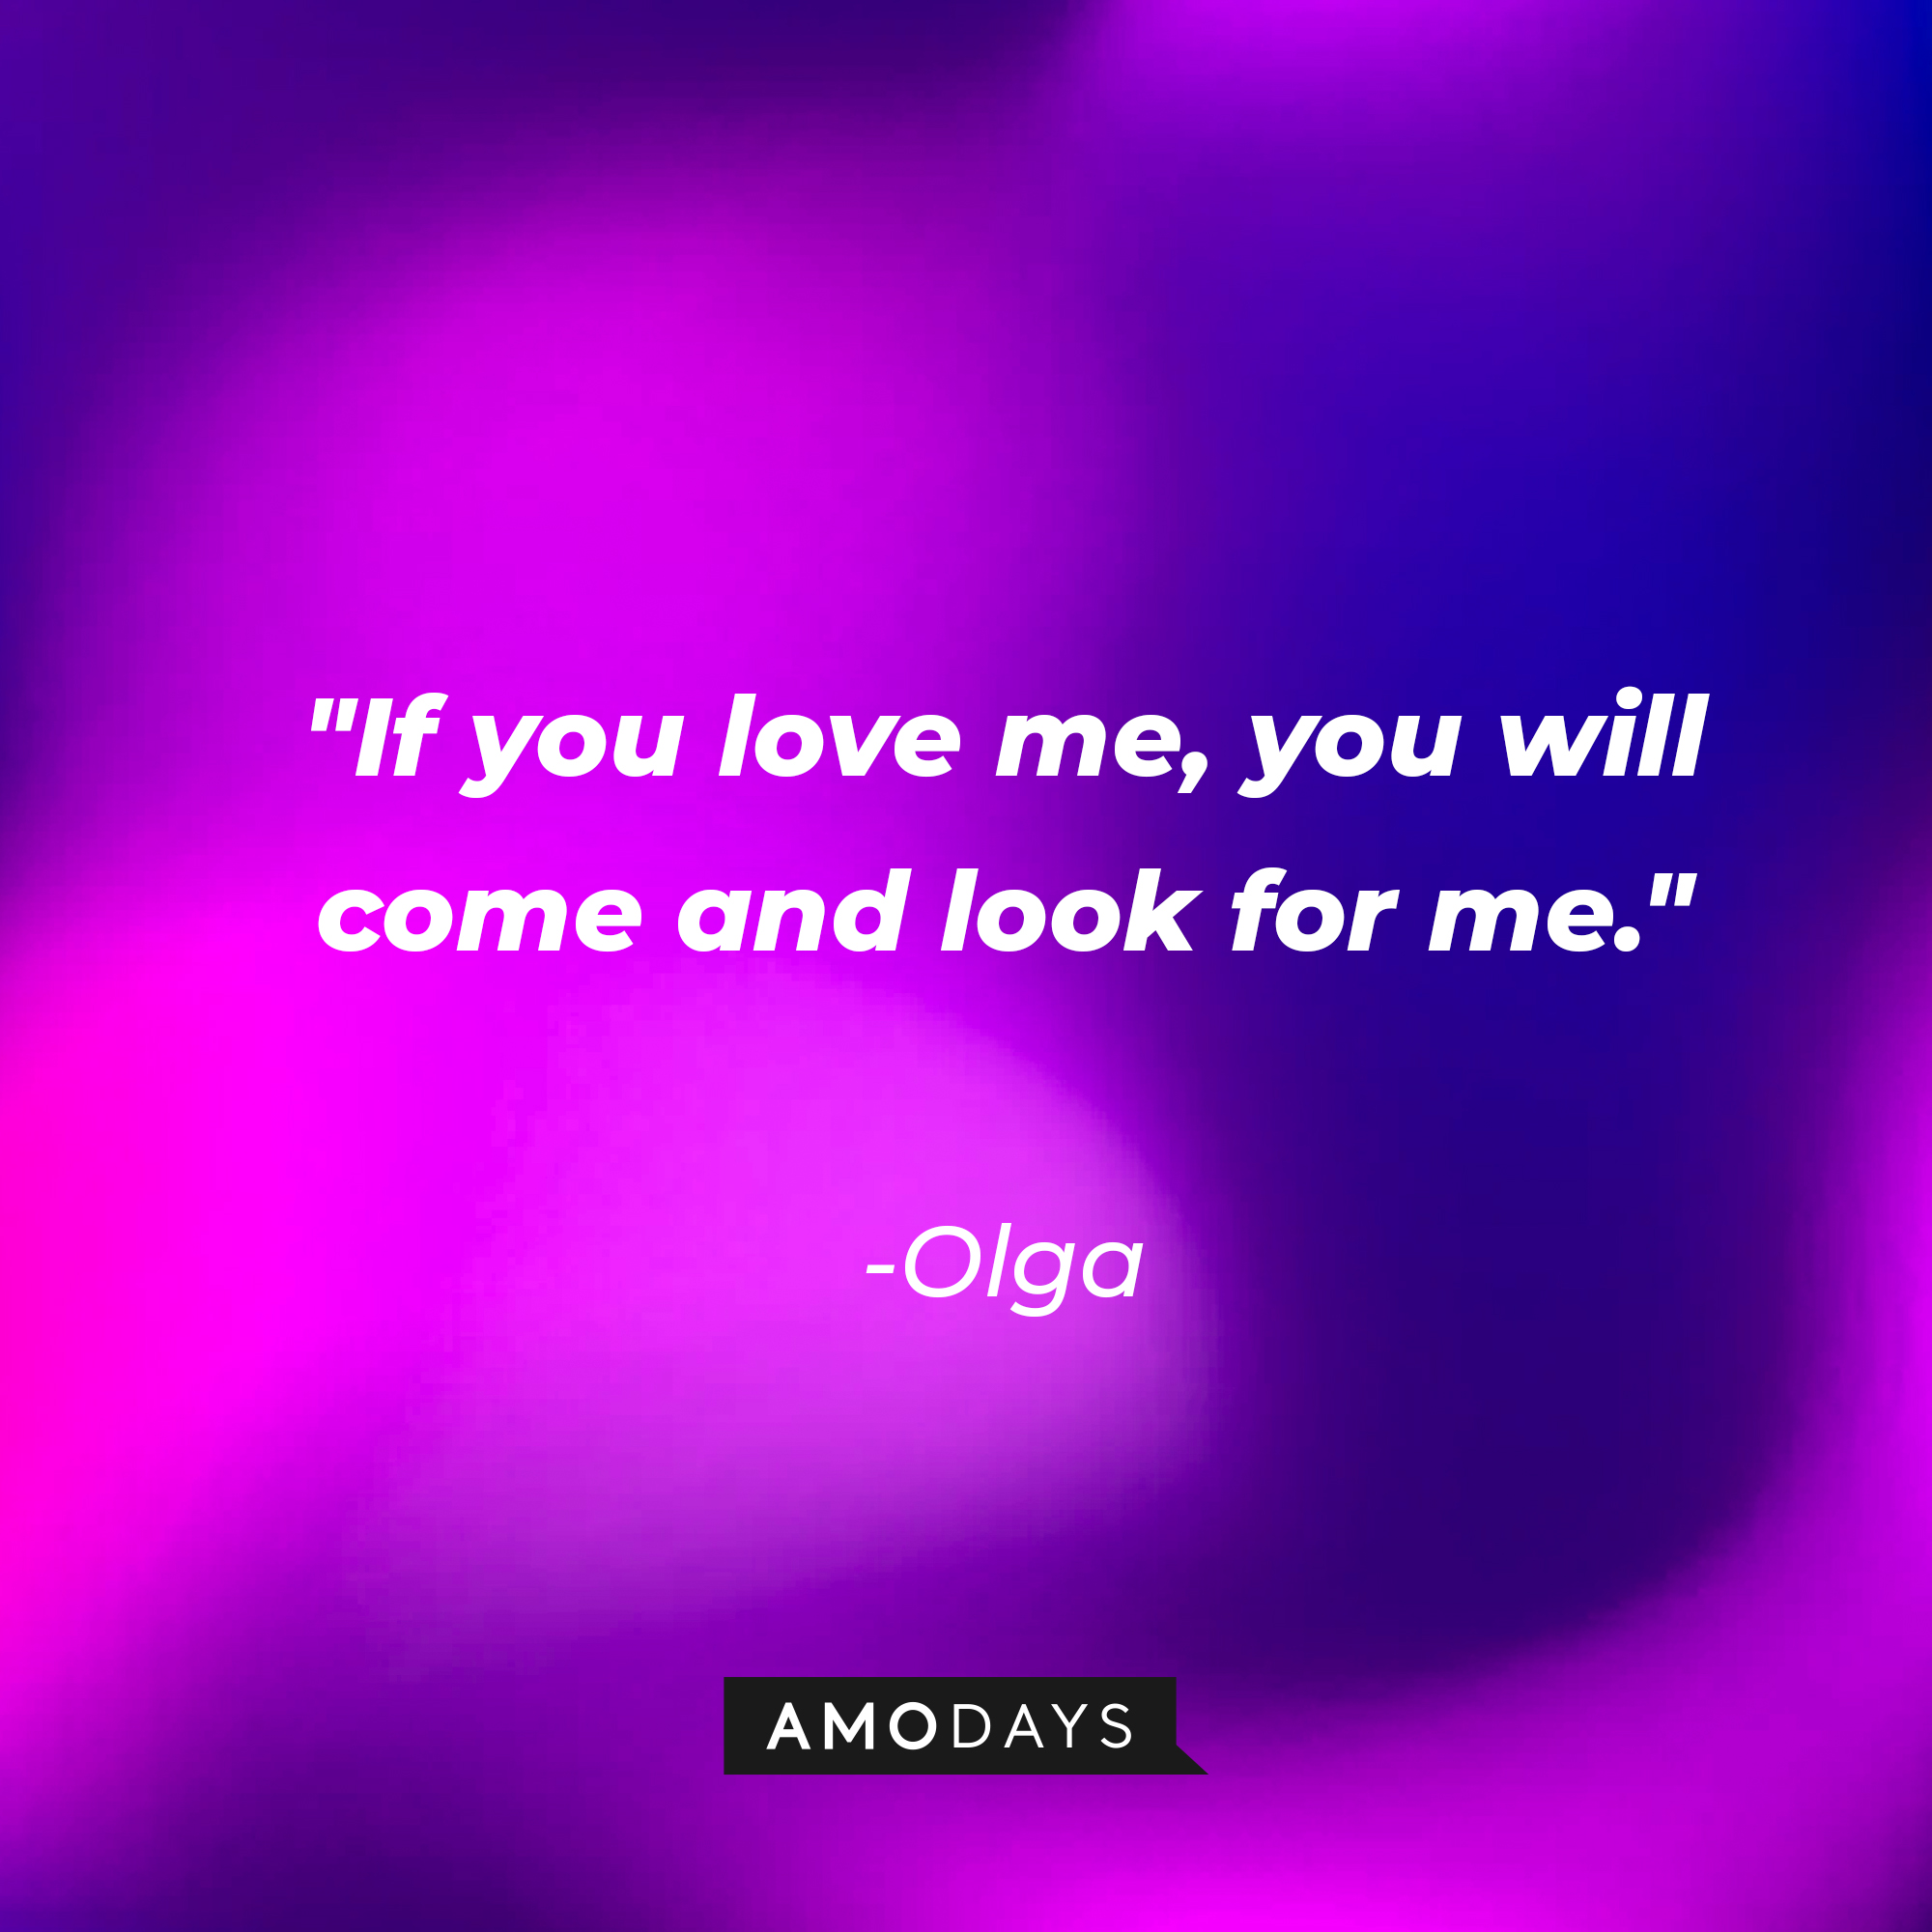 Olga's quote: "If you love me, you will come and look for me." | Source: AmoDays